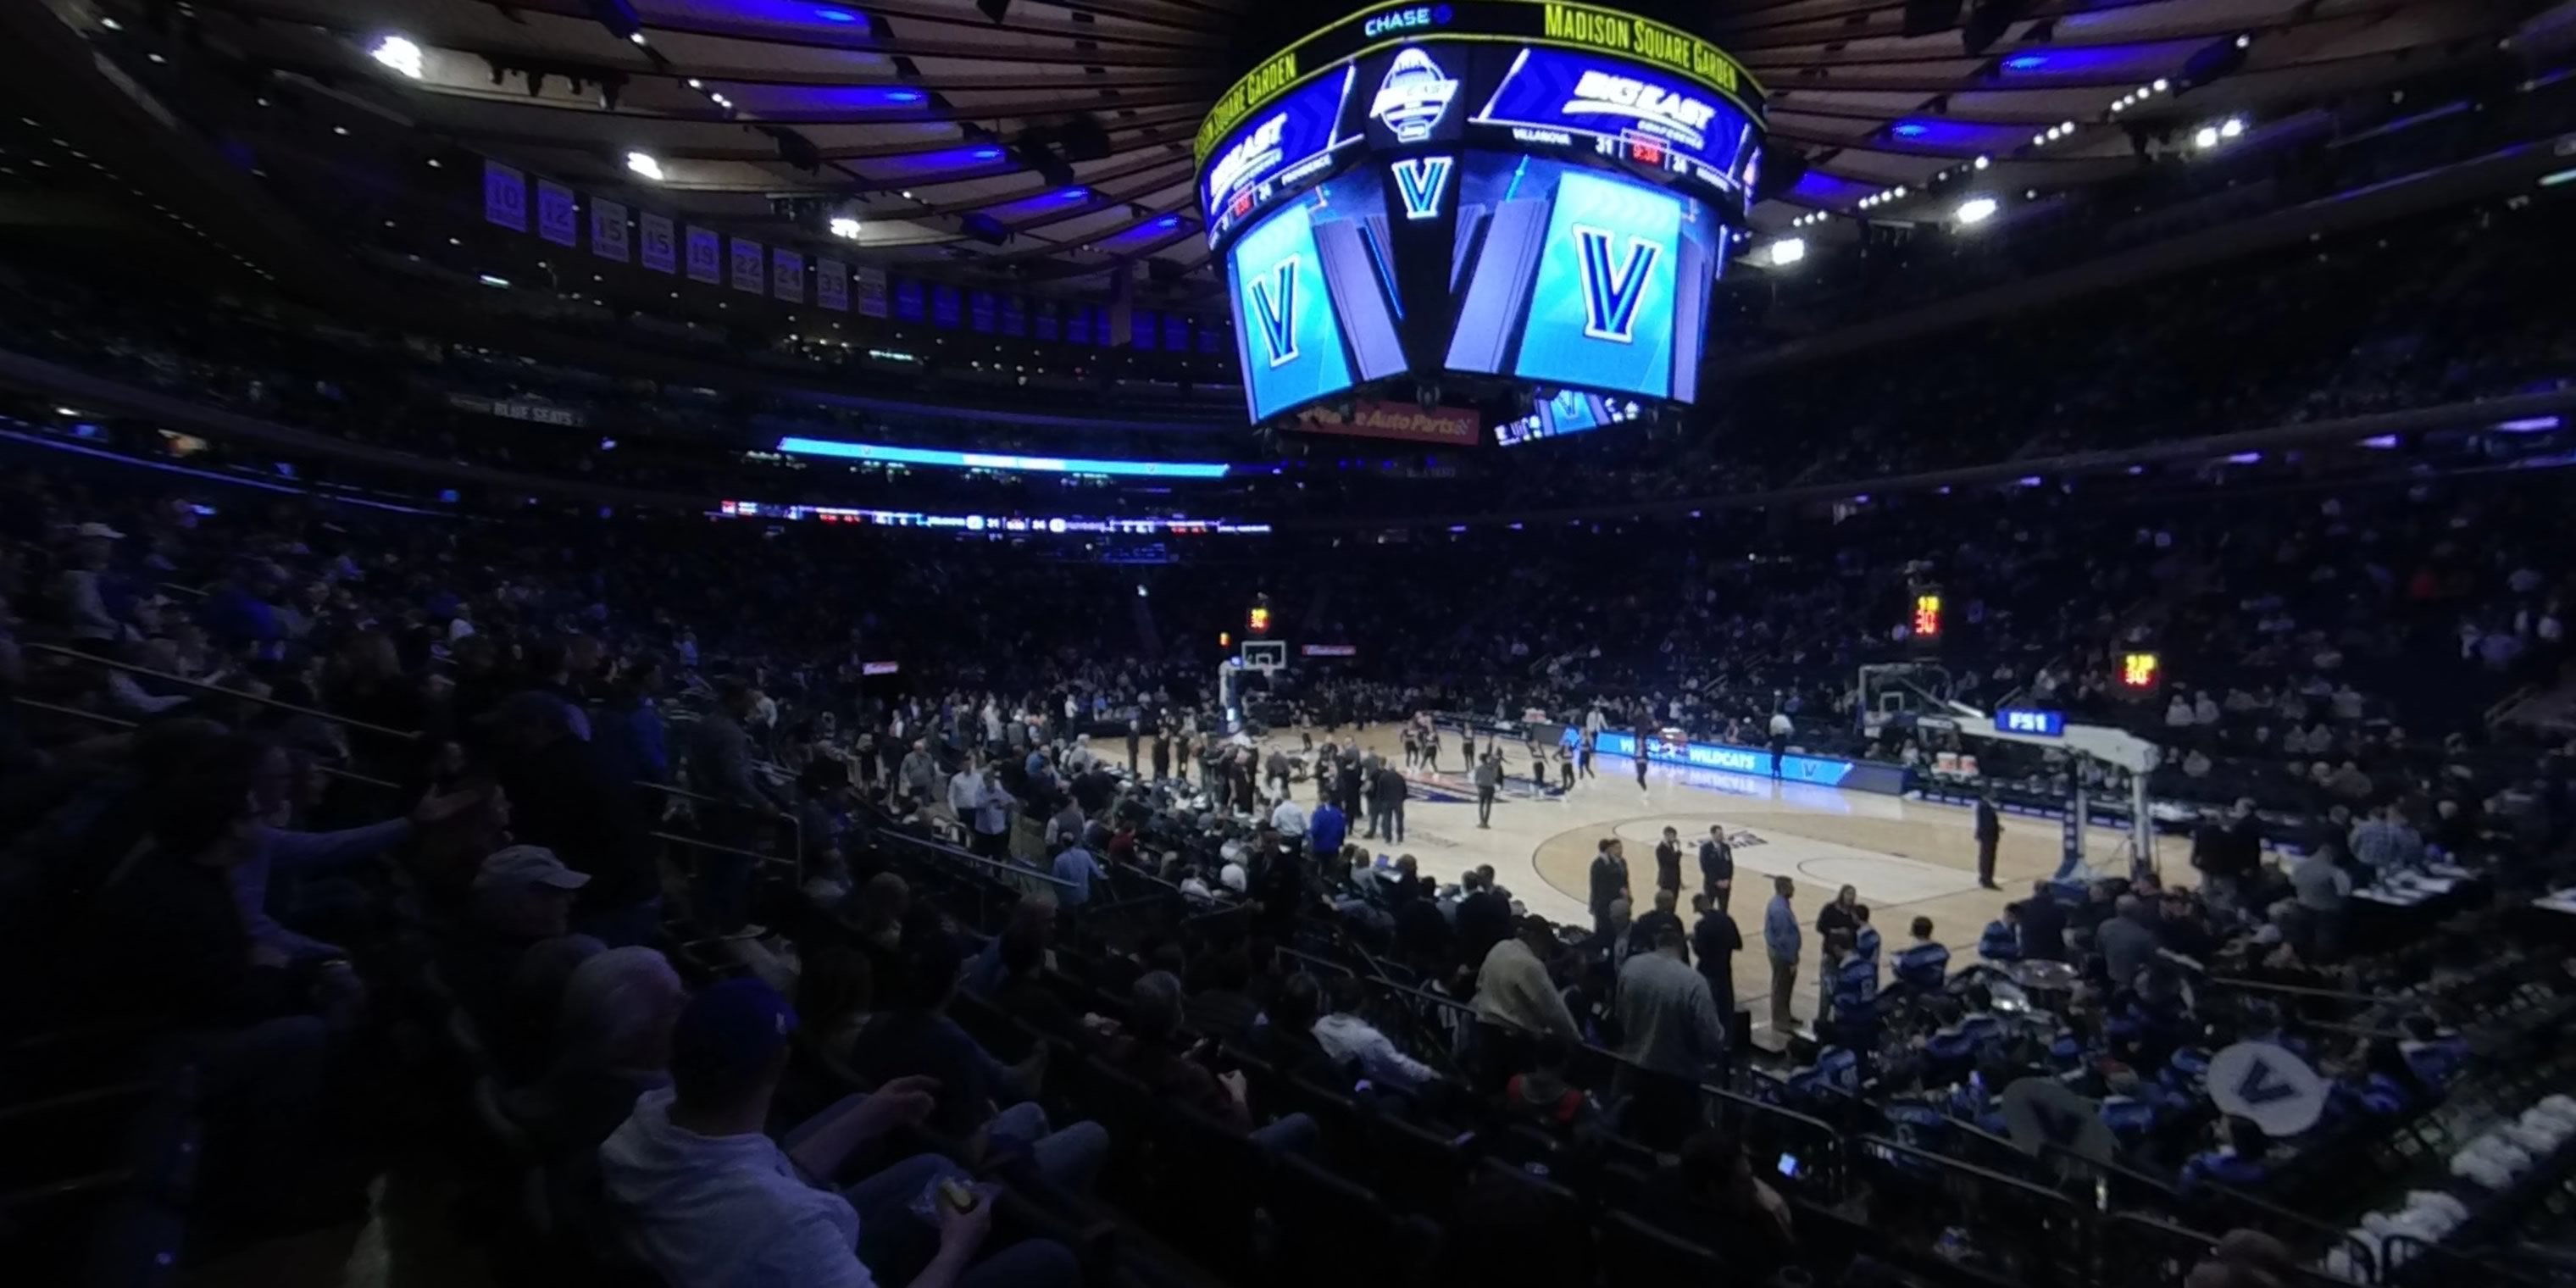 section 119 panoramic seat view  for basketball - madison square garden